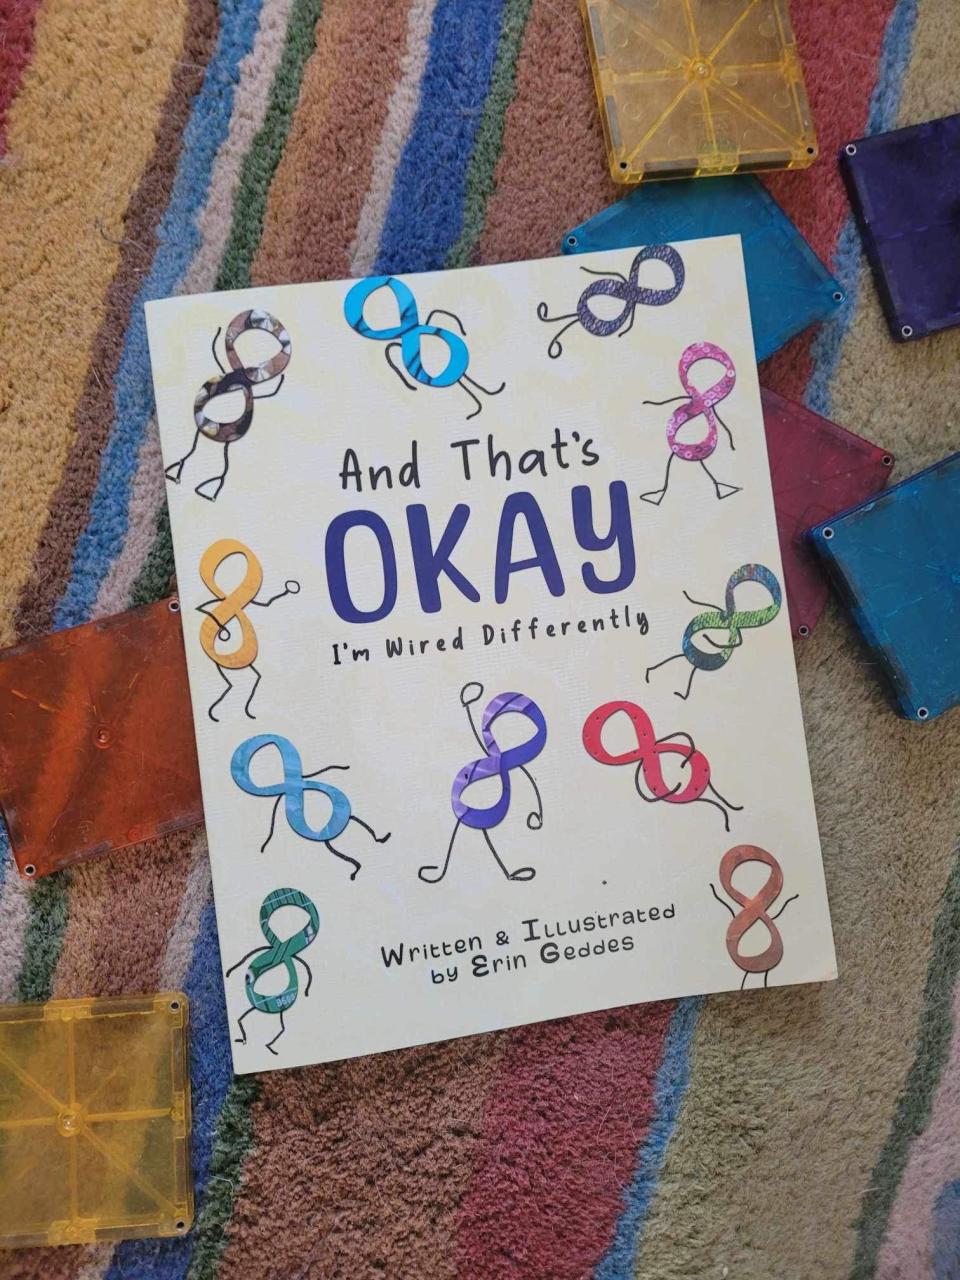 Erin Geddes’ children’s book about autism and neurodiversity is named “And That’s Okay"